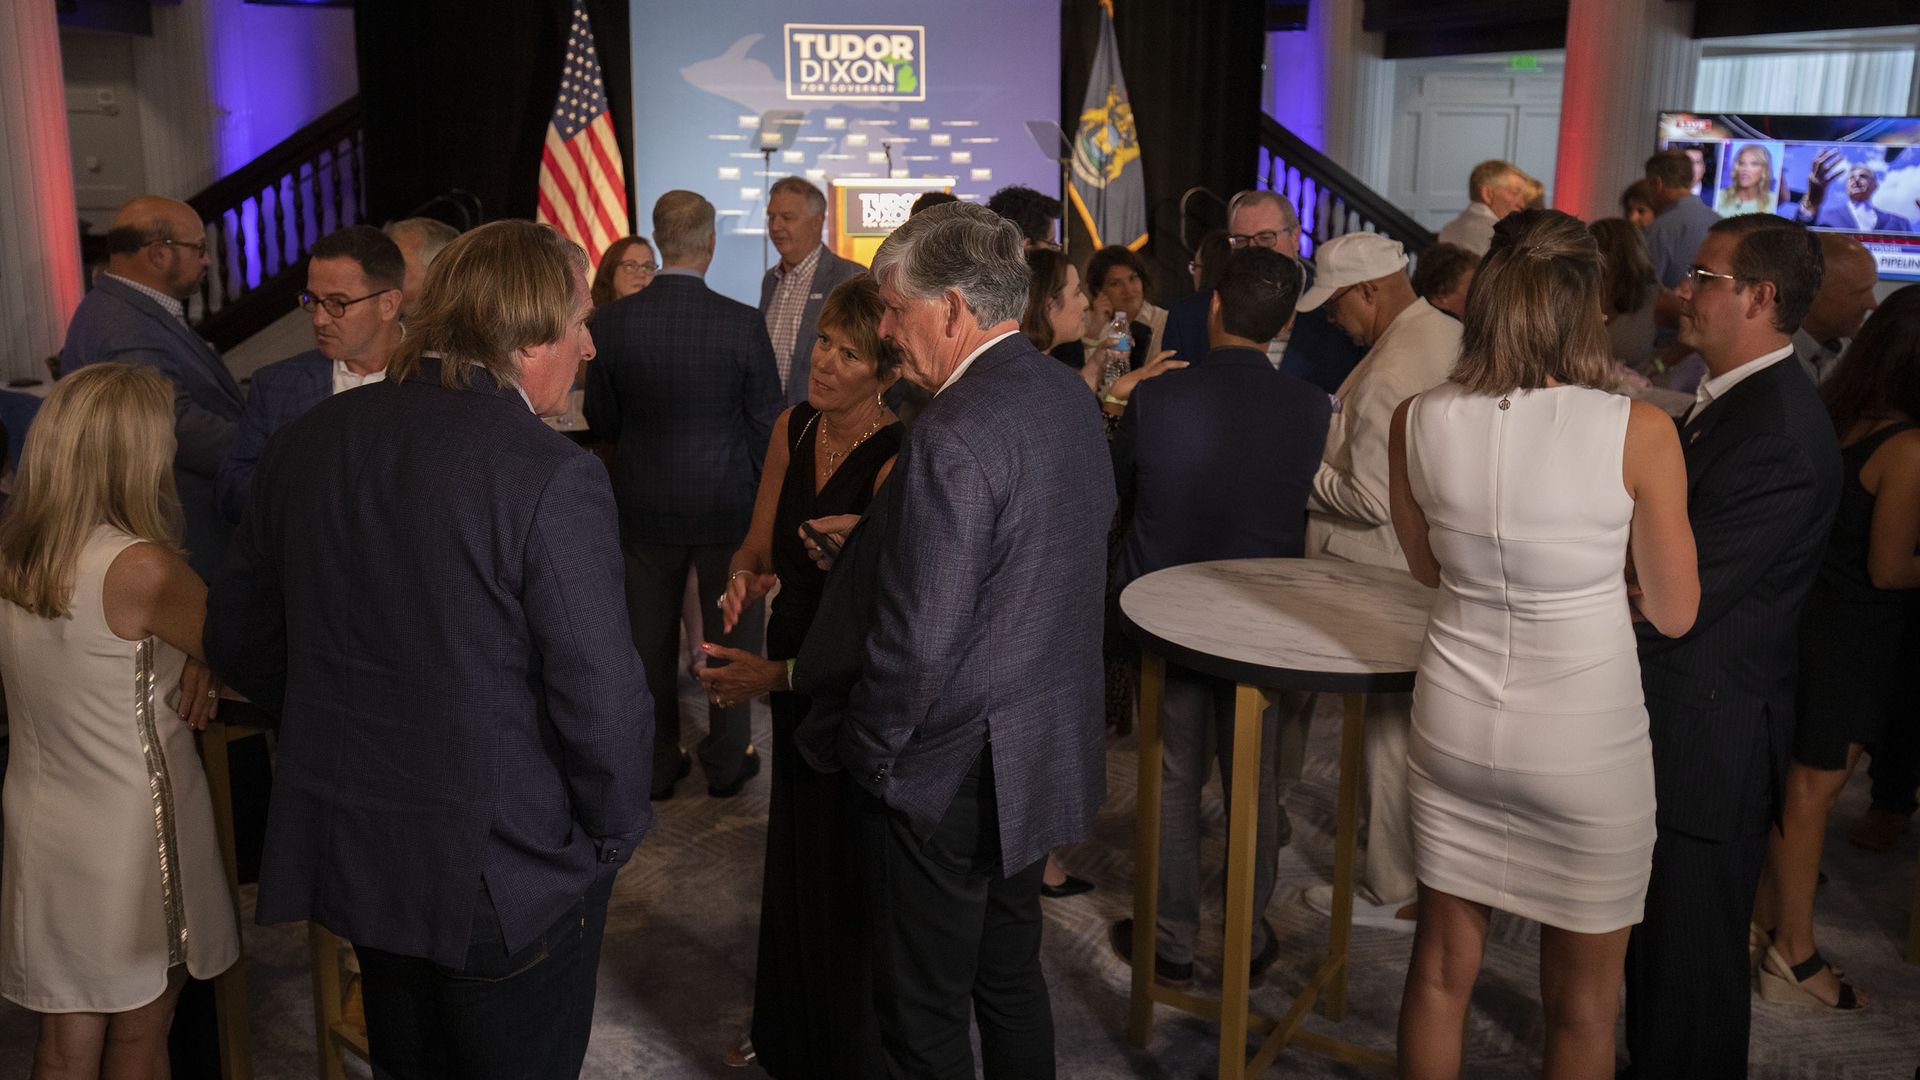 Donors wait for Michigan Republican gubernatorial candidate Tudor Dixon to speak at her primary election night party at the Amway Grand Plaza on August 2.